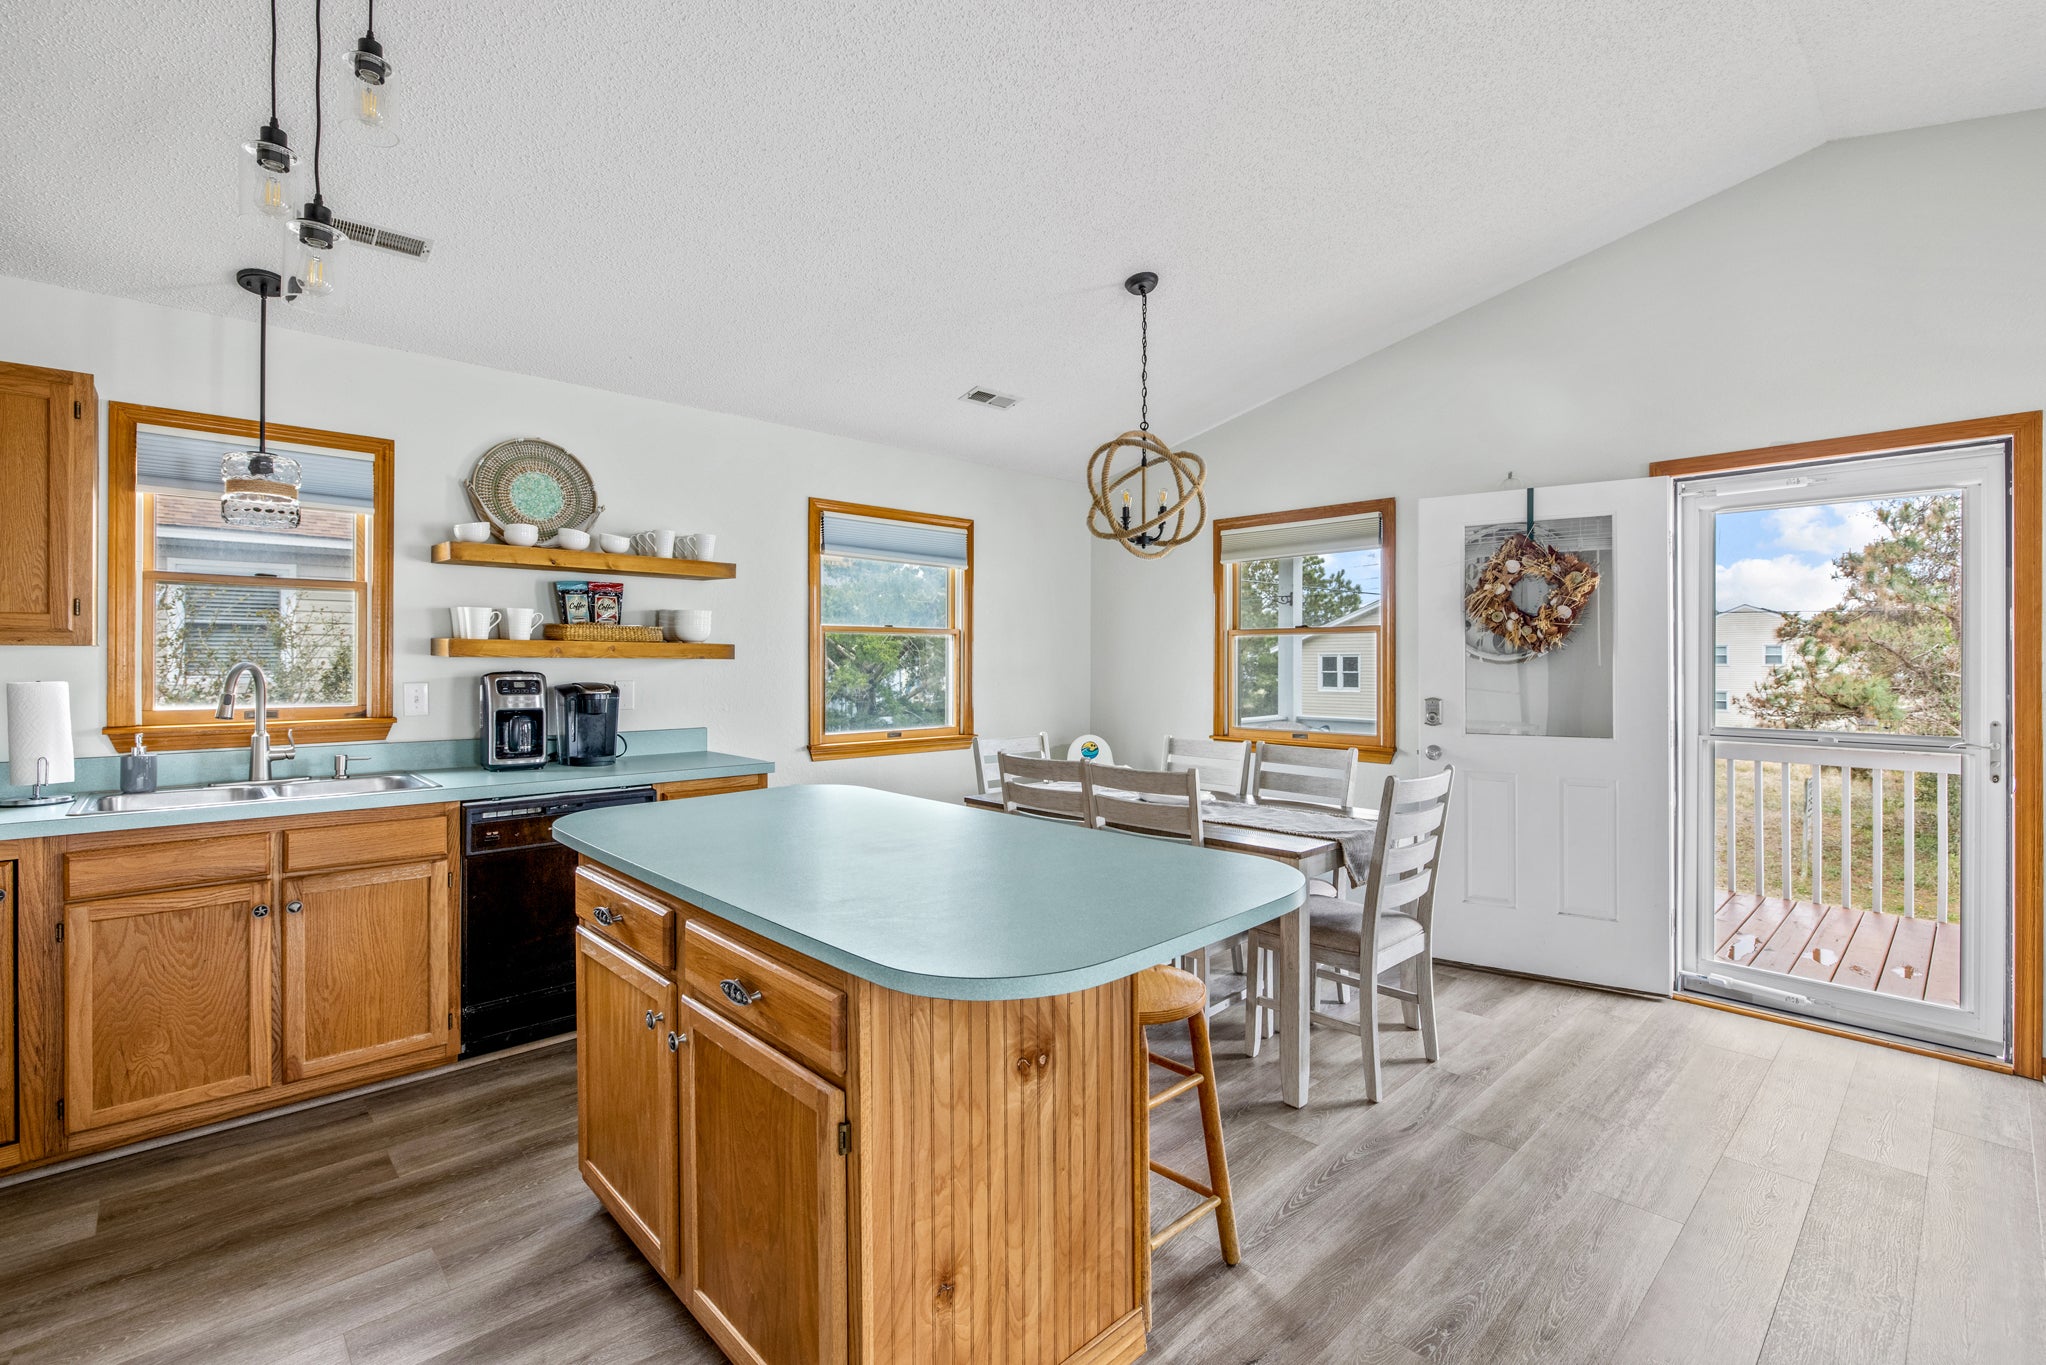 KDN9904: OBX Getaway | Top Level Dining Area and Kitchen